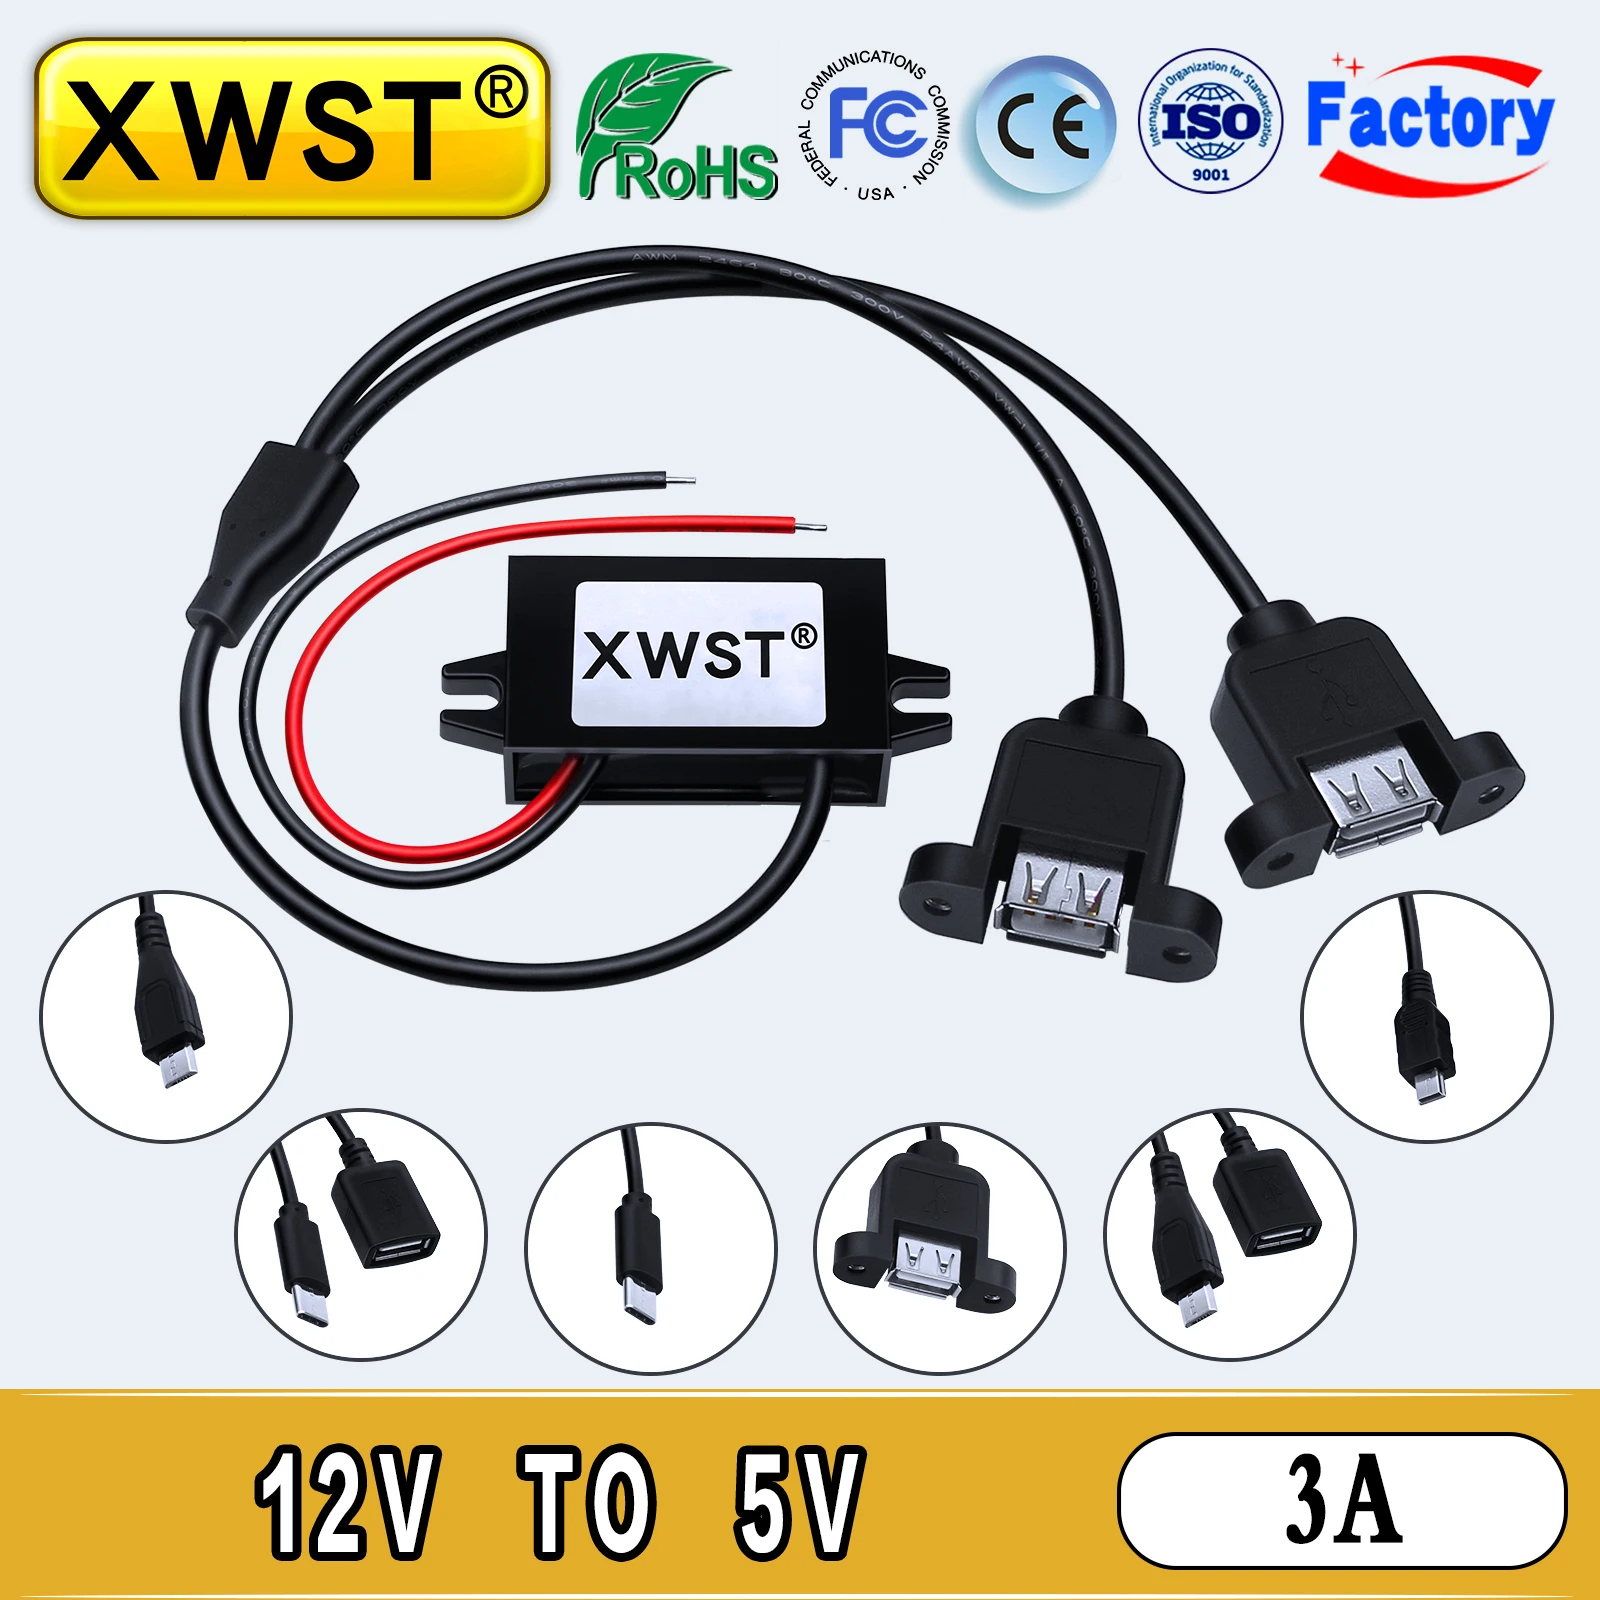 XWST DC DC 12V to 5V Step Down Converter 3A 15W Type-C Mini USB Buck Power  Supply Charger for Auto Car Motorcycle Bus Truck - AliExpress